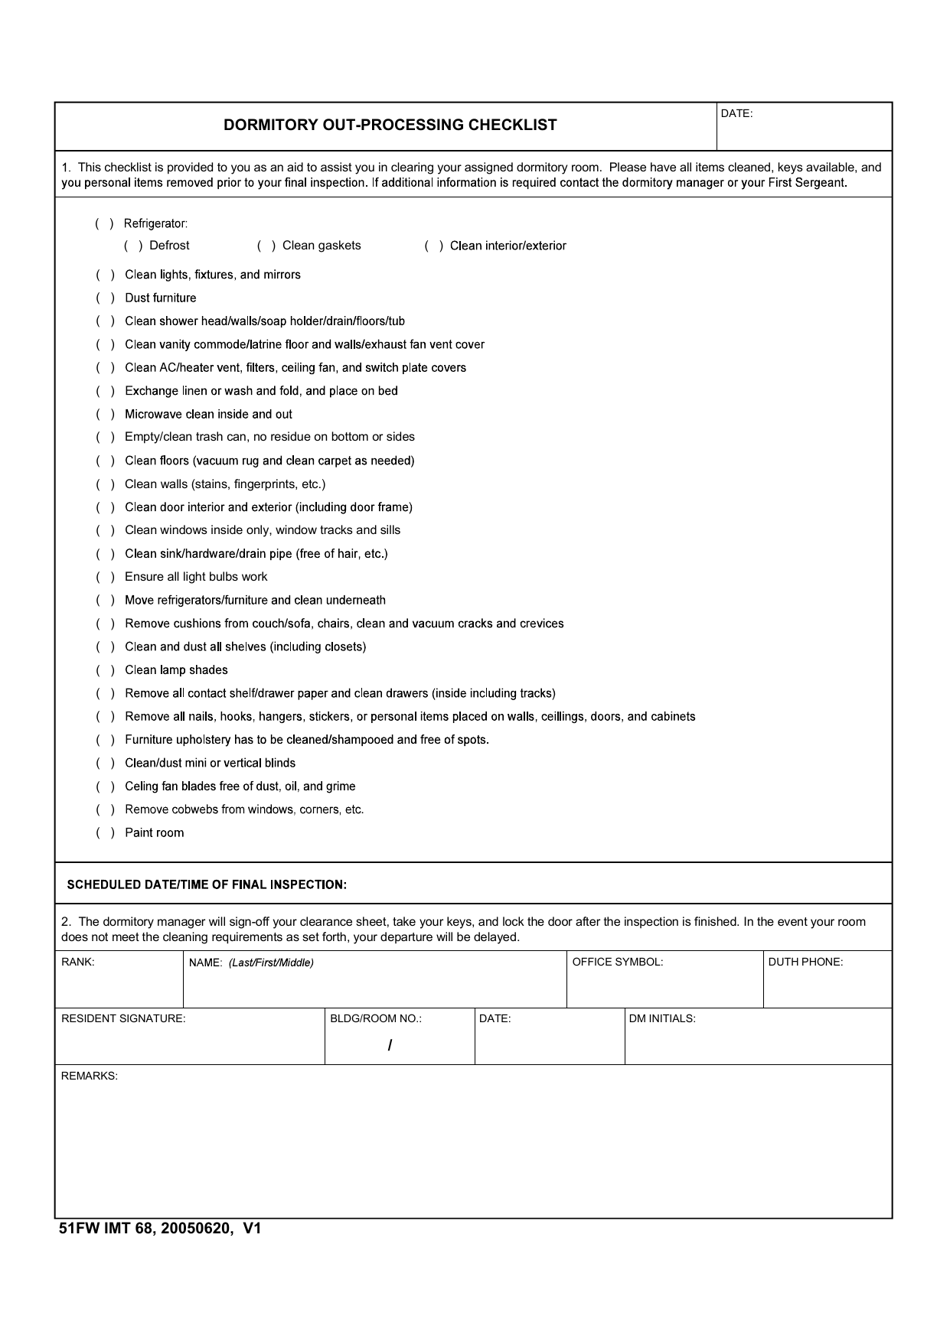 51 FW IMT Form 68 Dormitory out-Processing Checklist, Page 1